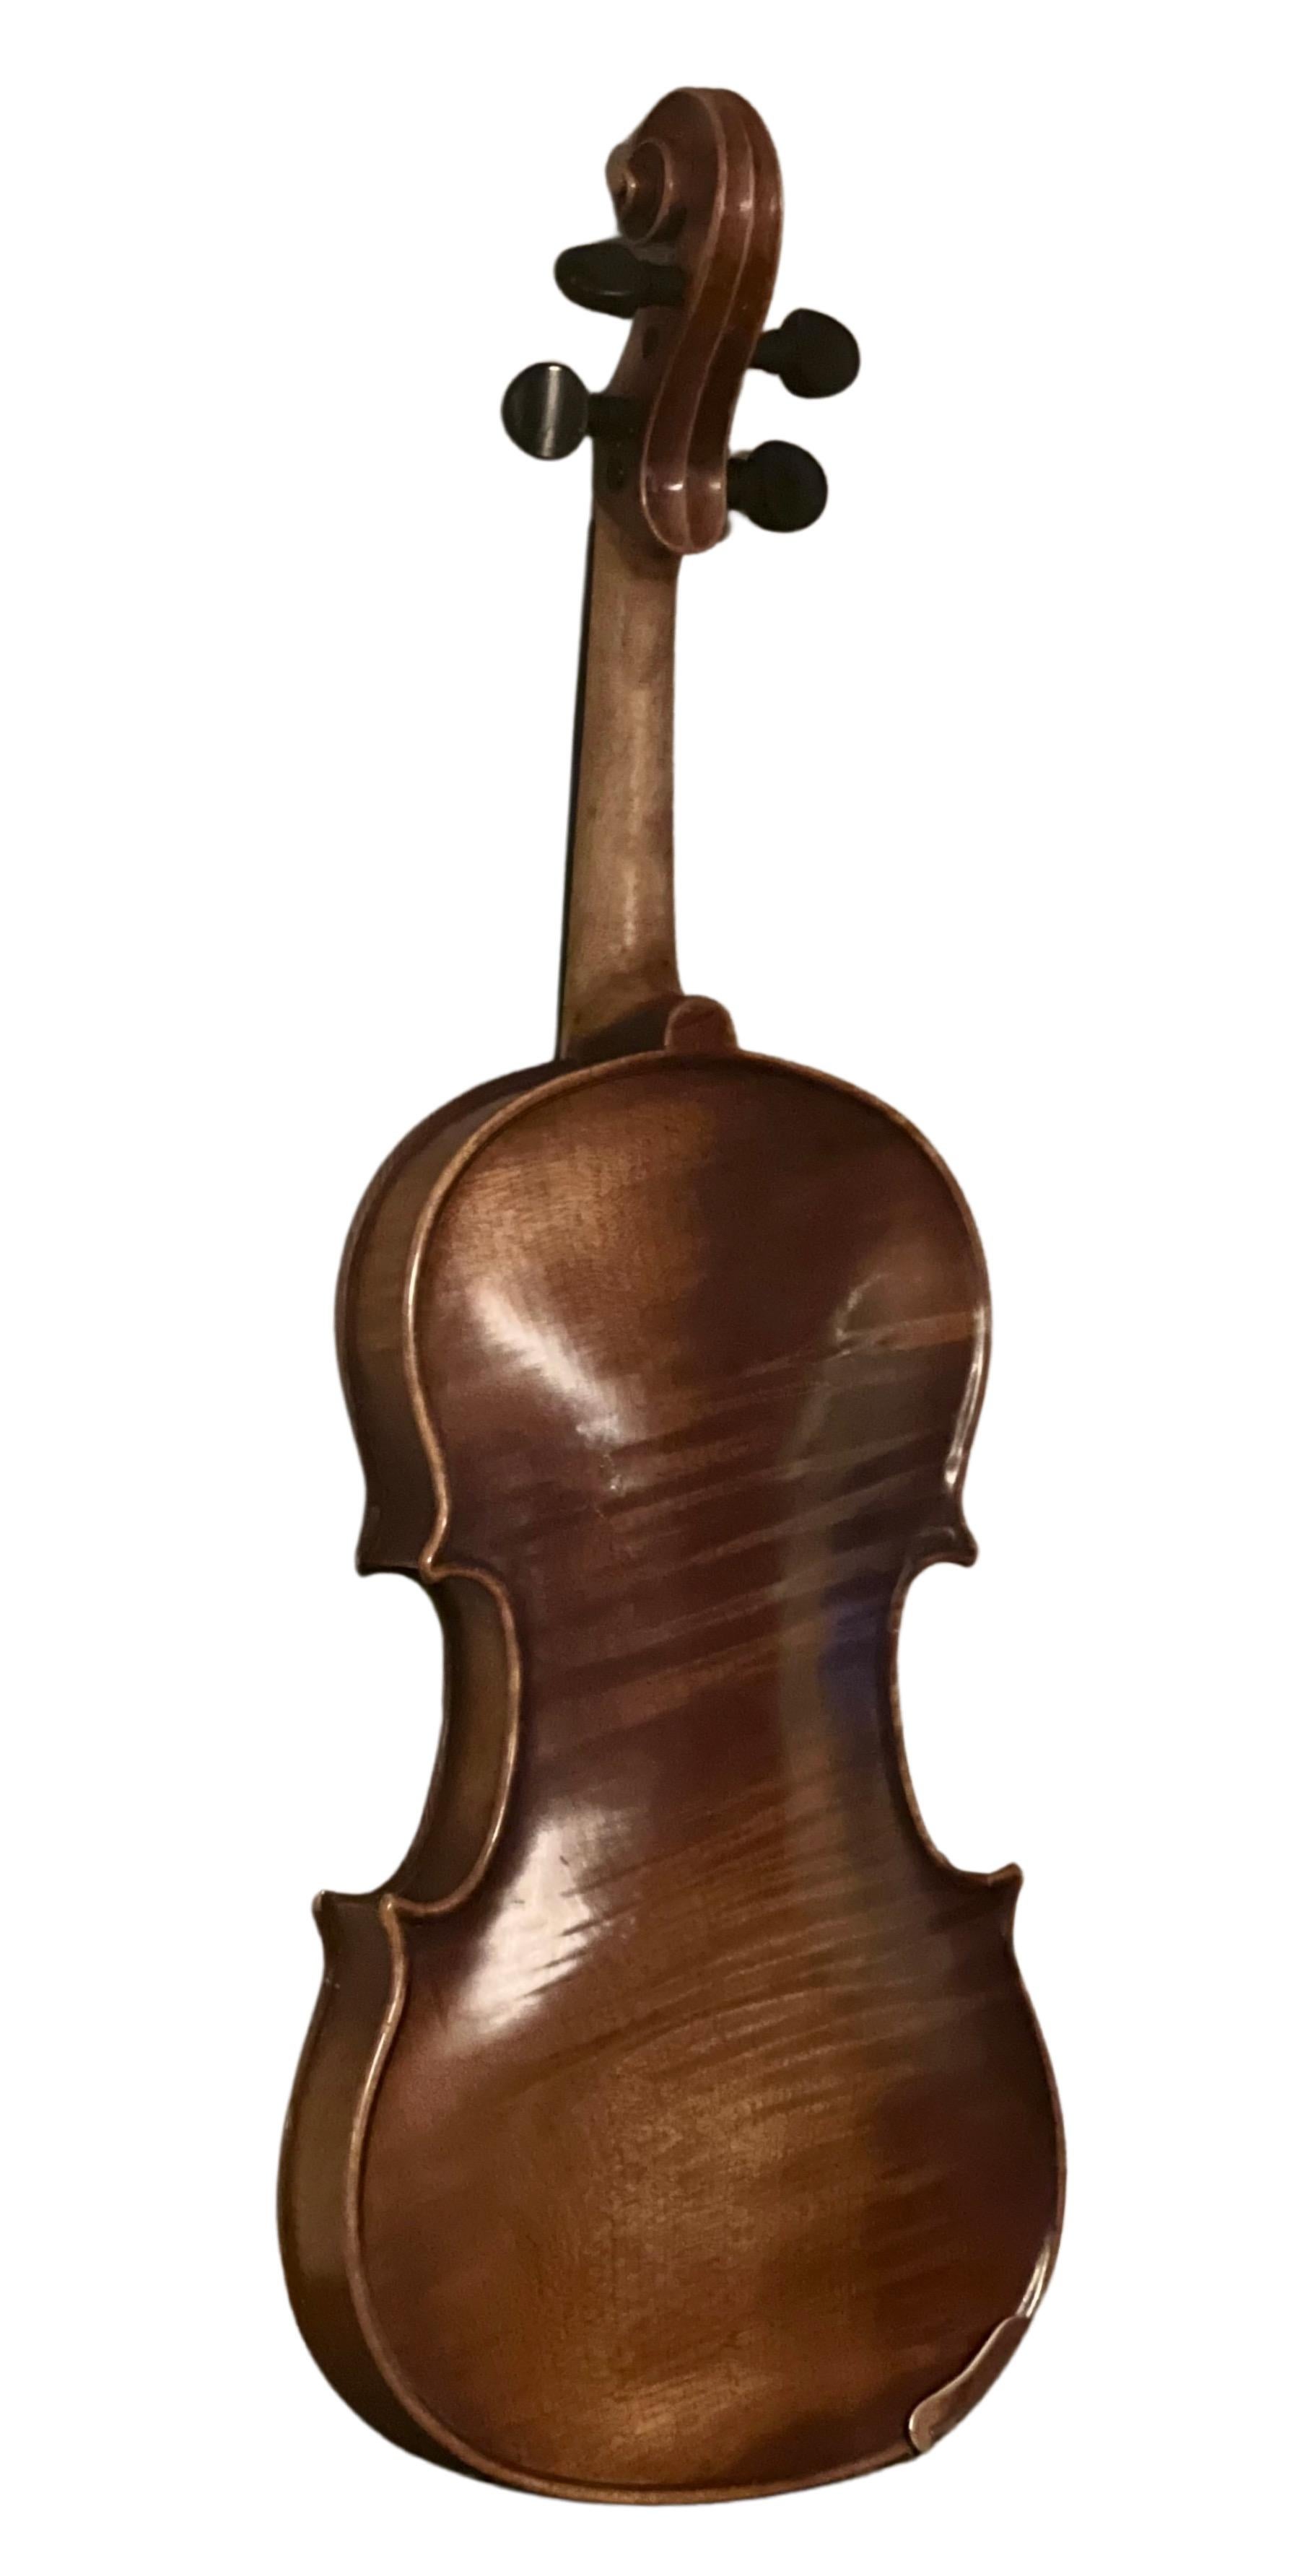 Wood 1970 3/4 E.R. Pfretzschner Hand-Crafted Violin in the Style of A. Stradivarius For Sale